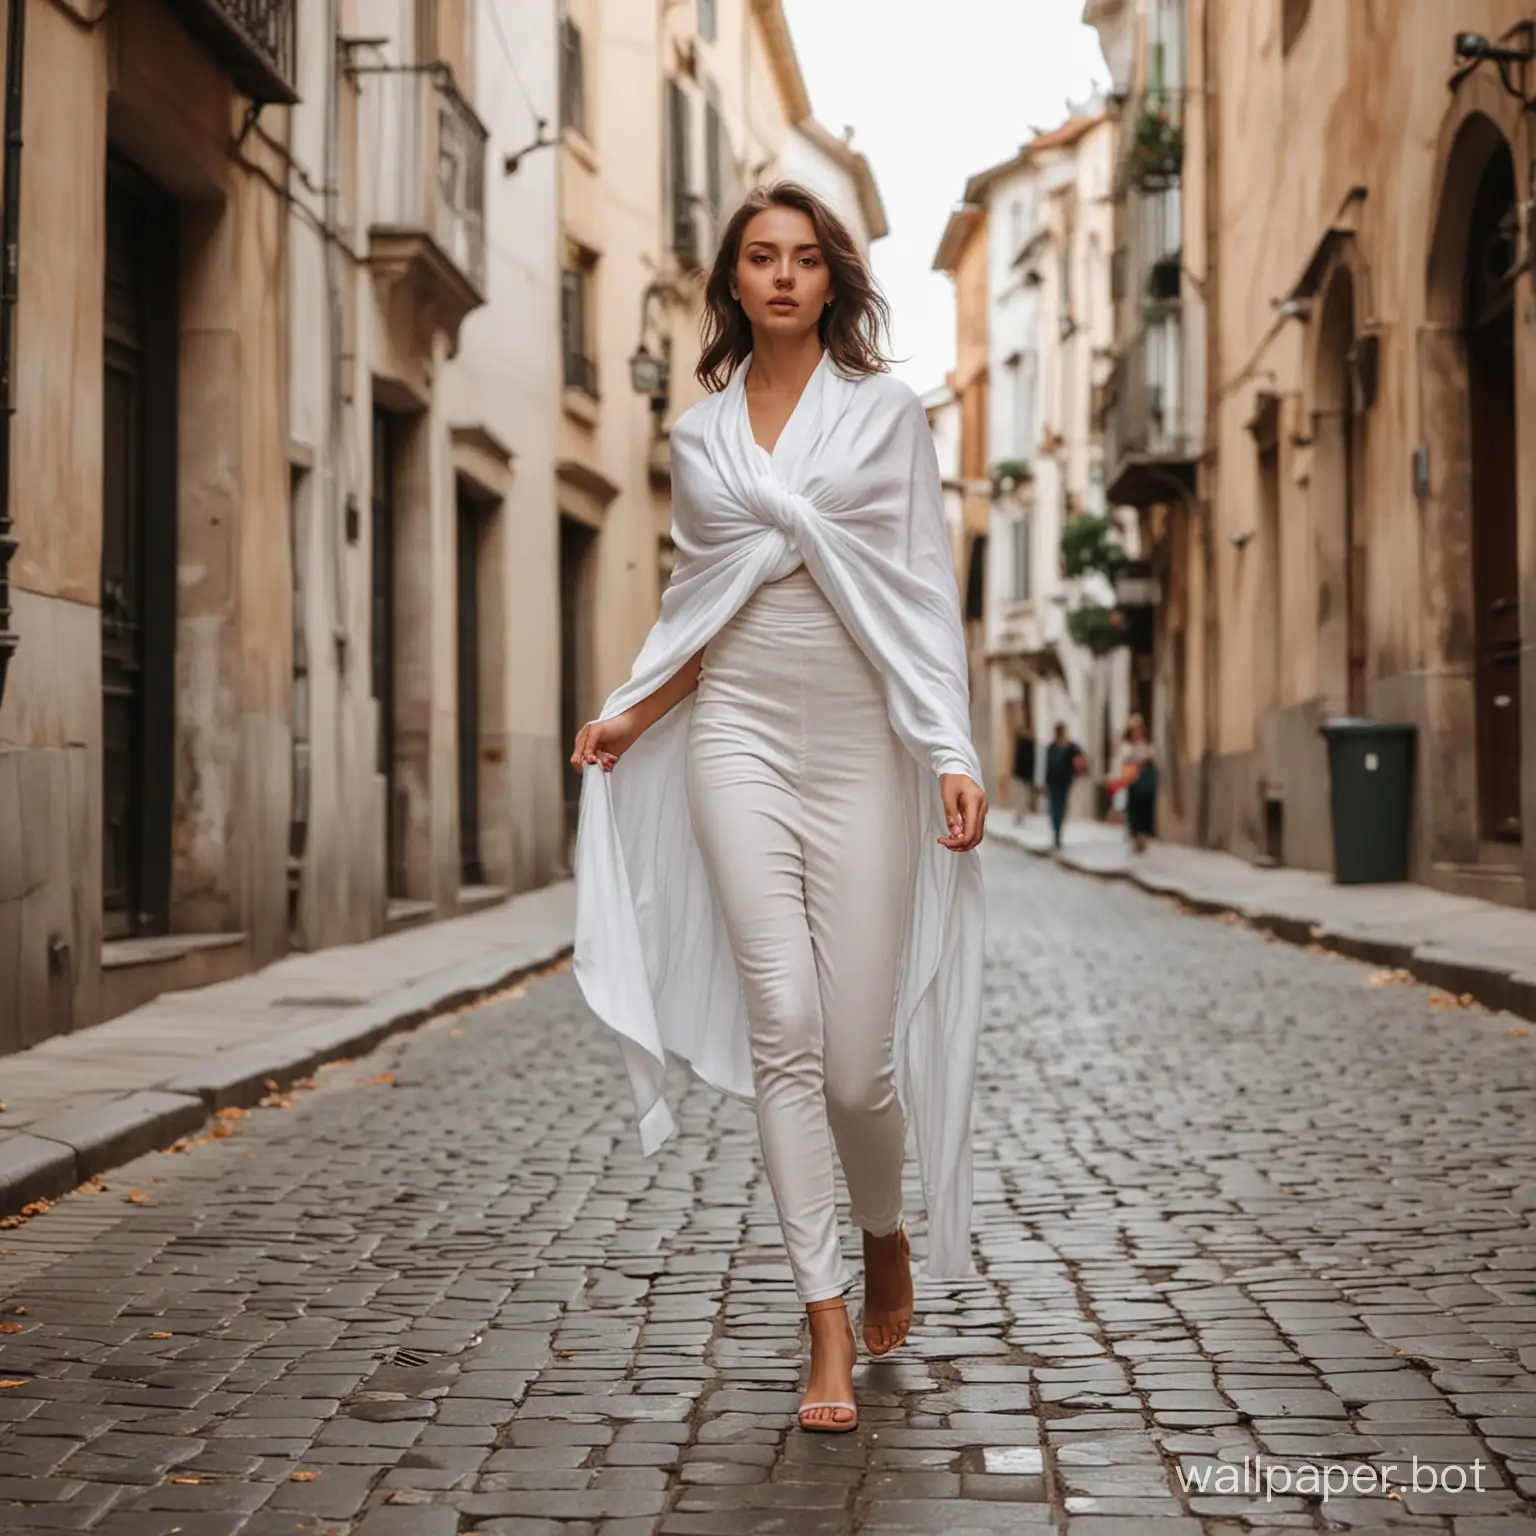 Girl-Walking-in-City-Street-with-White-Shawl